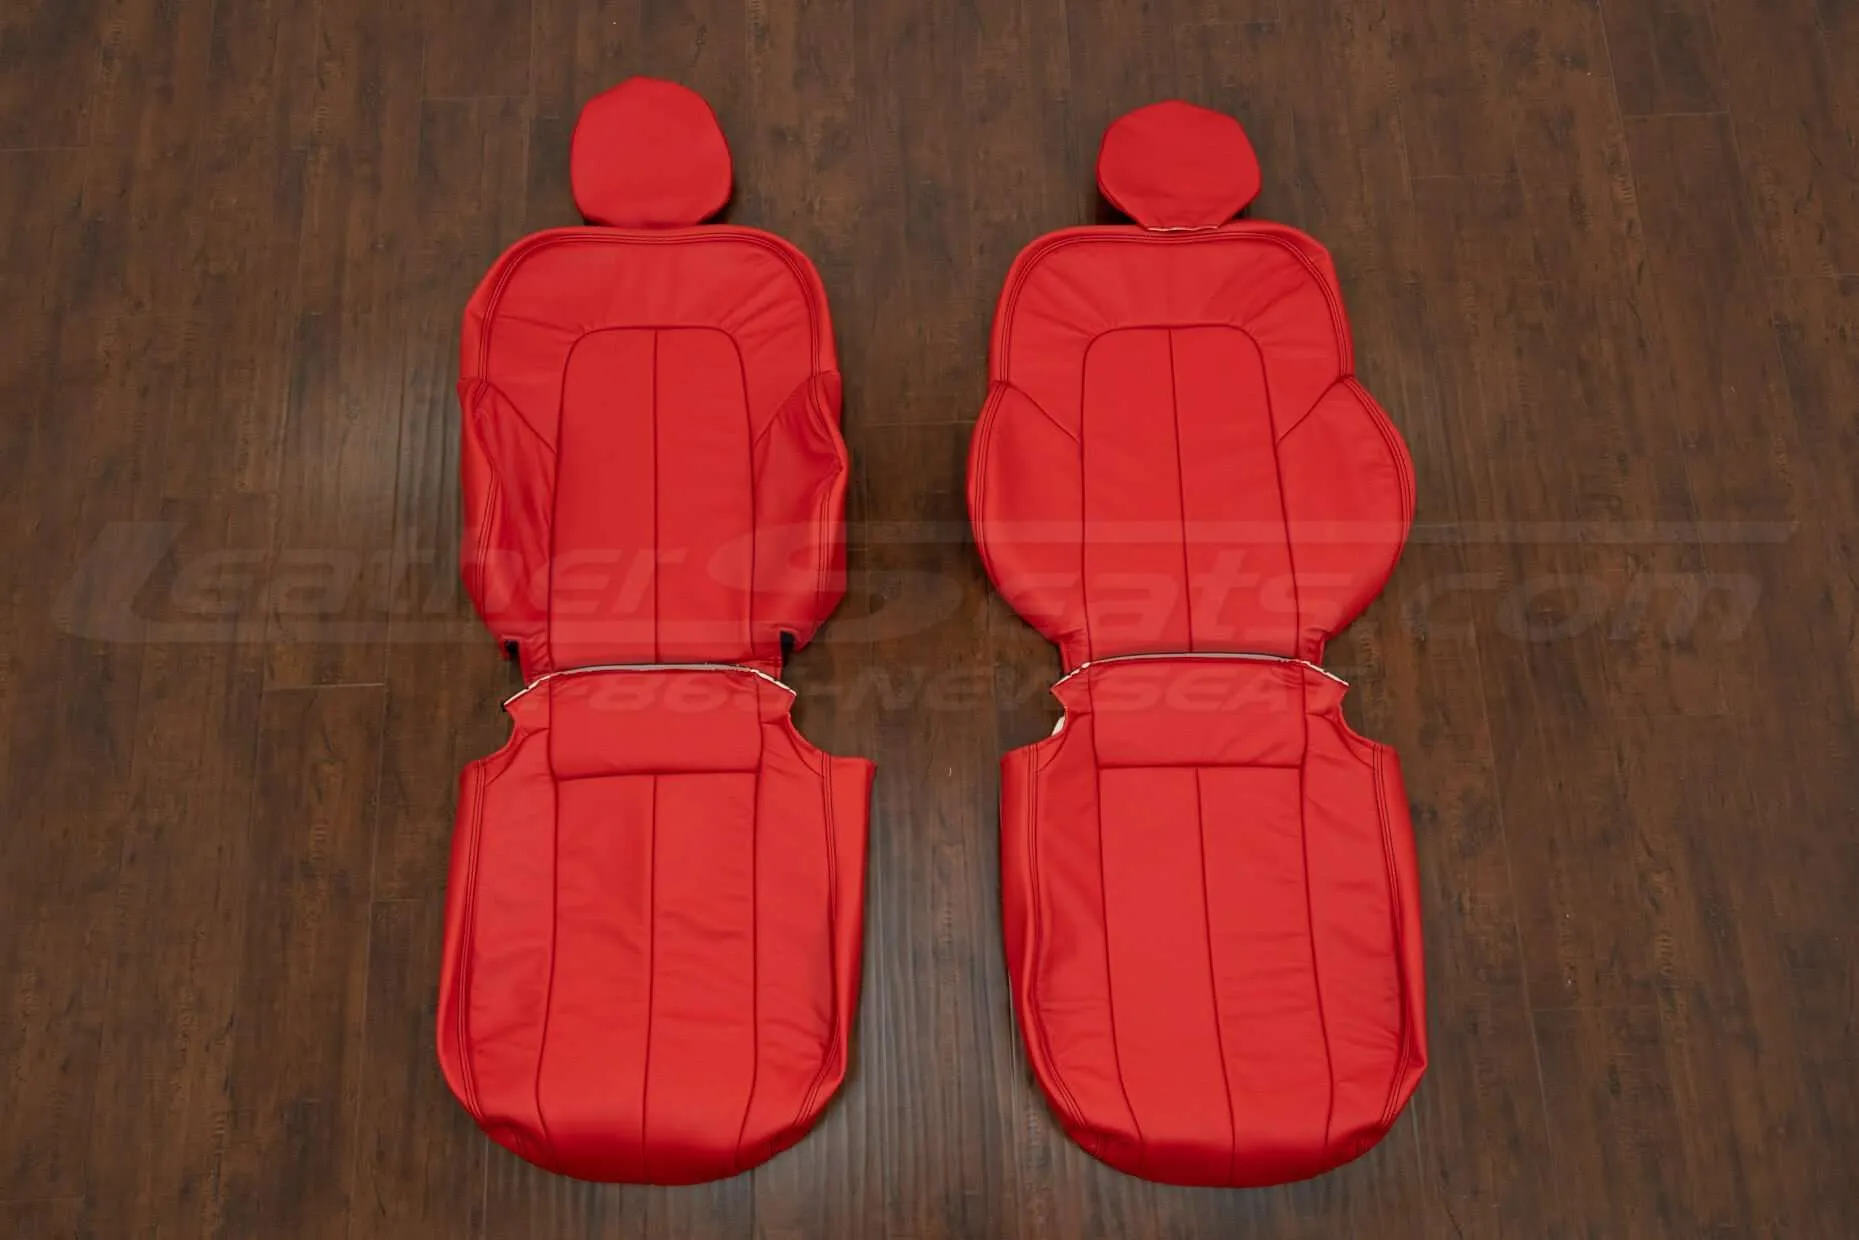 05-07 Chrysler Crossfire Leather seat Kit - Bright red - Front seat upholsery